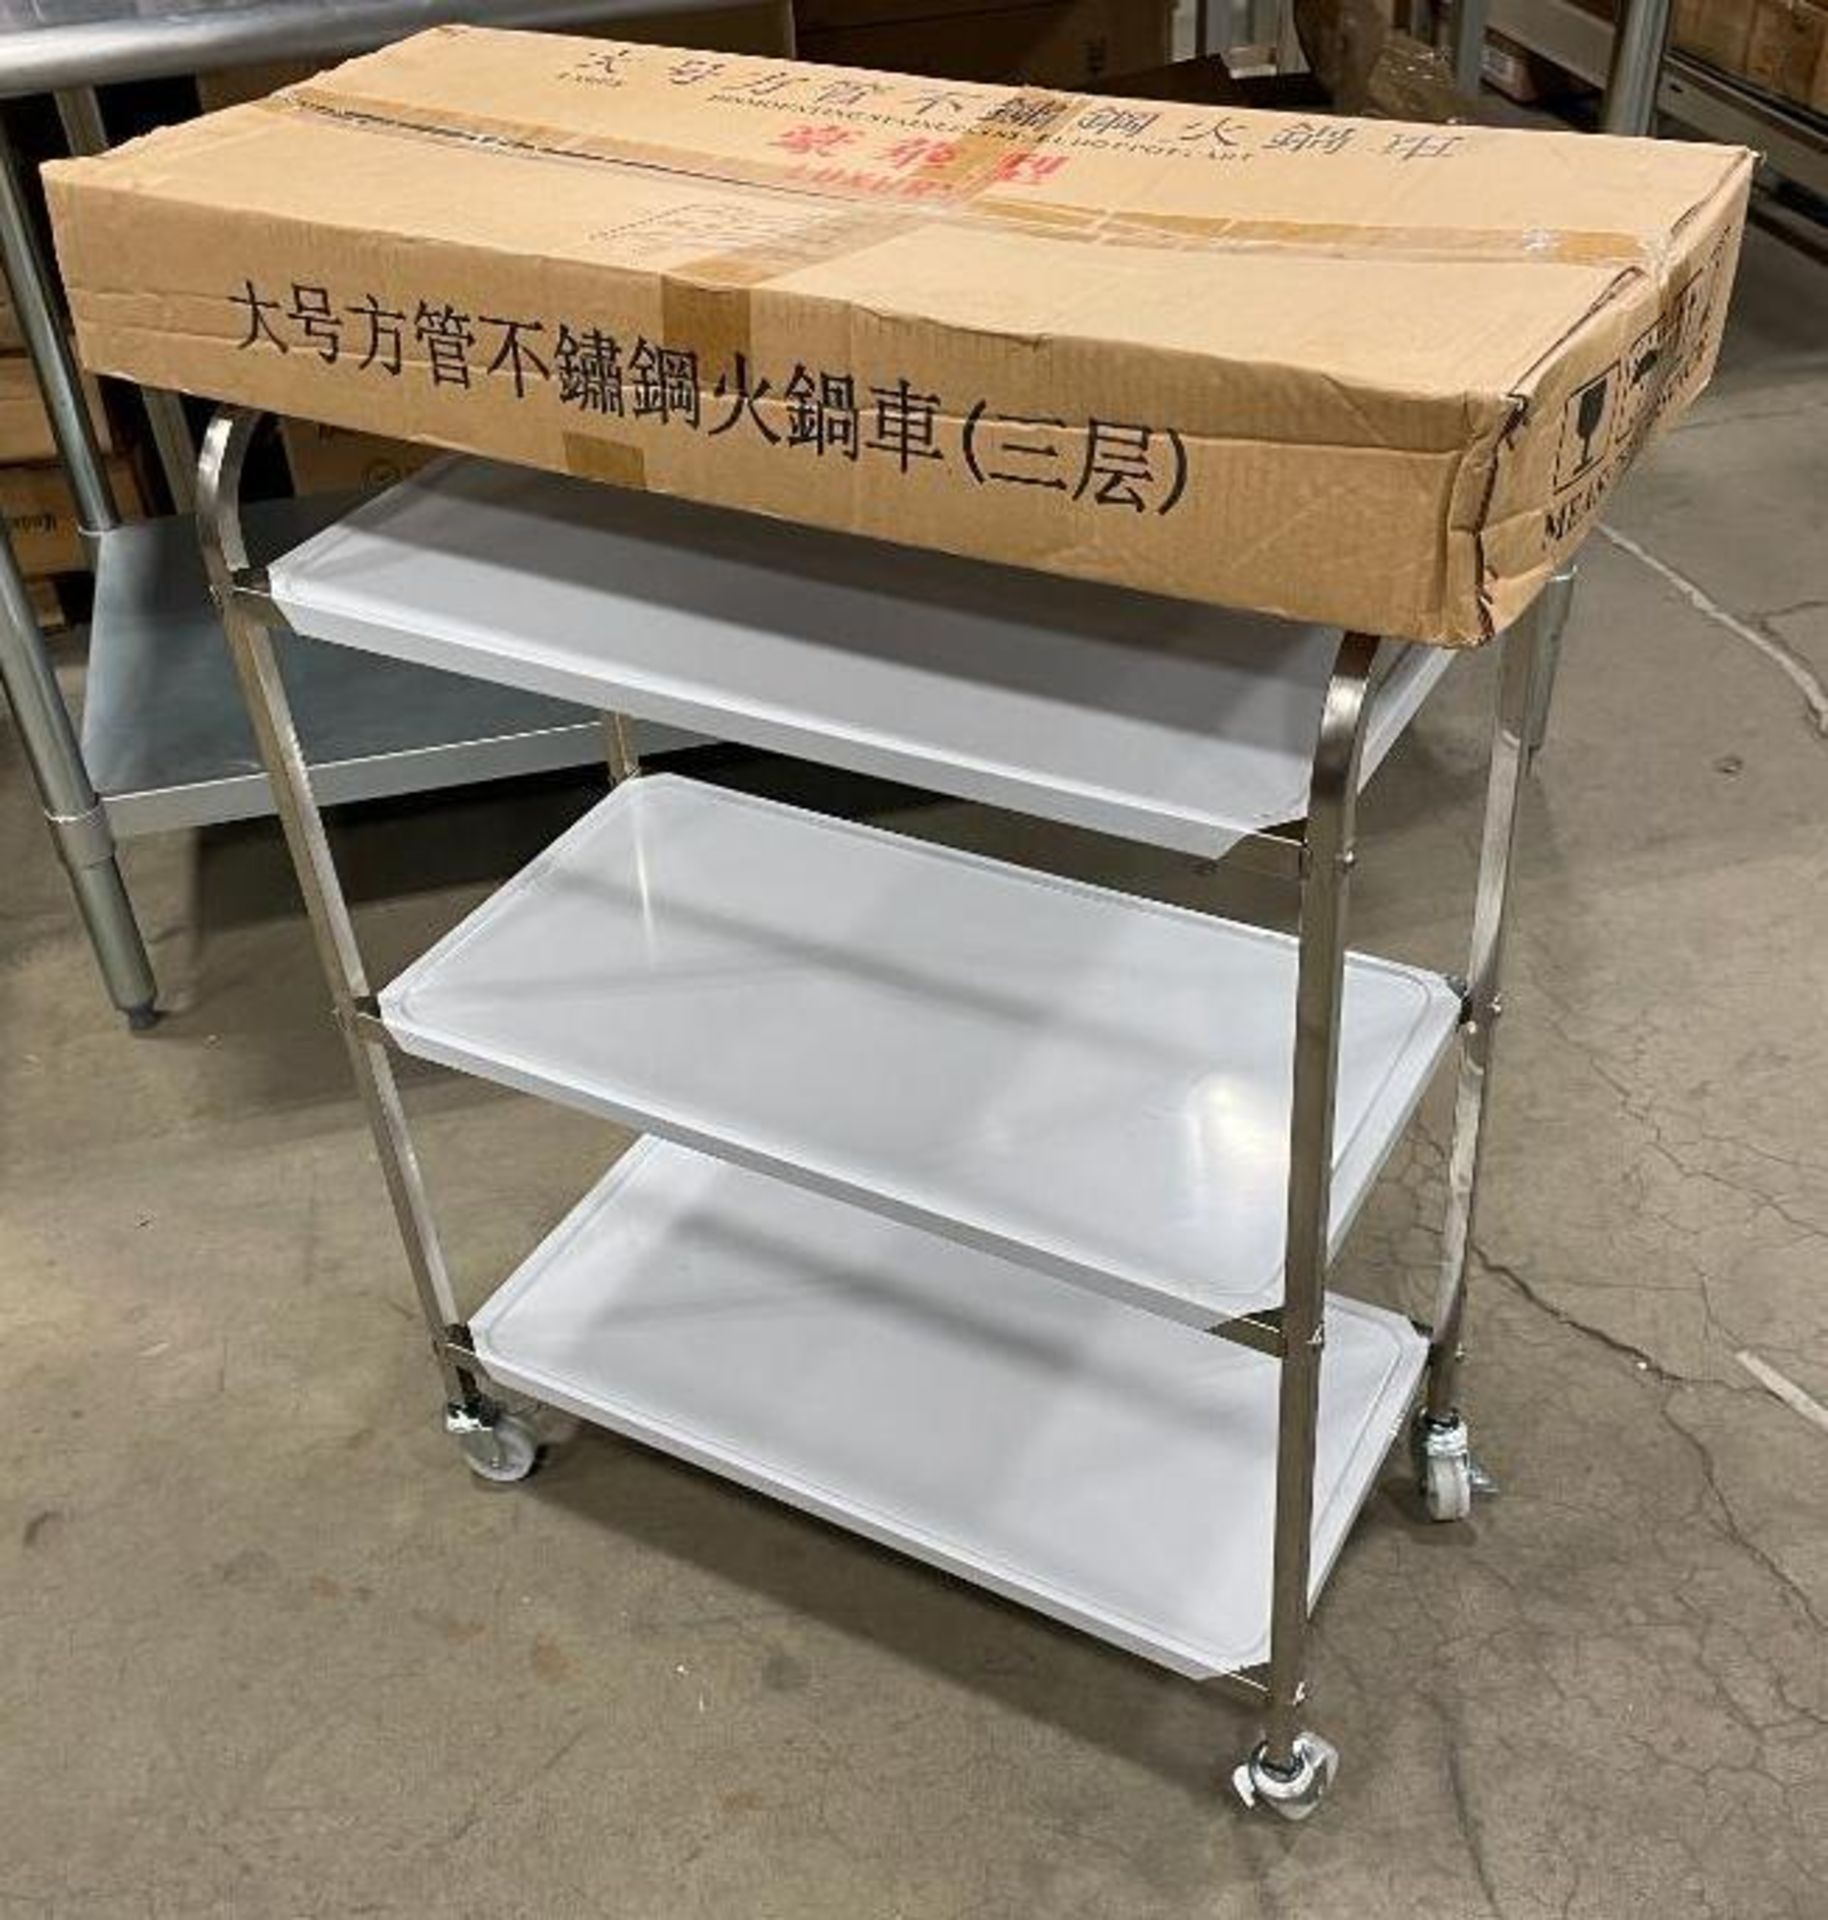 (2) 3-TIER STAINLESS STEEL BUSSING CART - Image 4 of 4